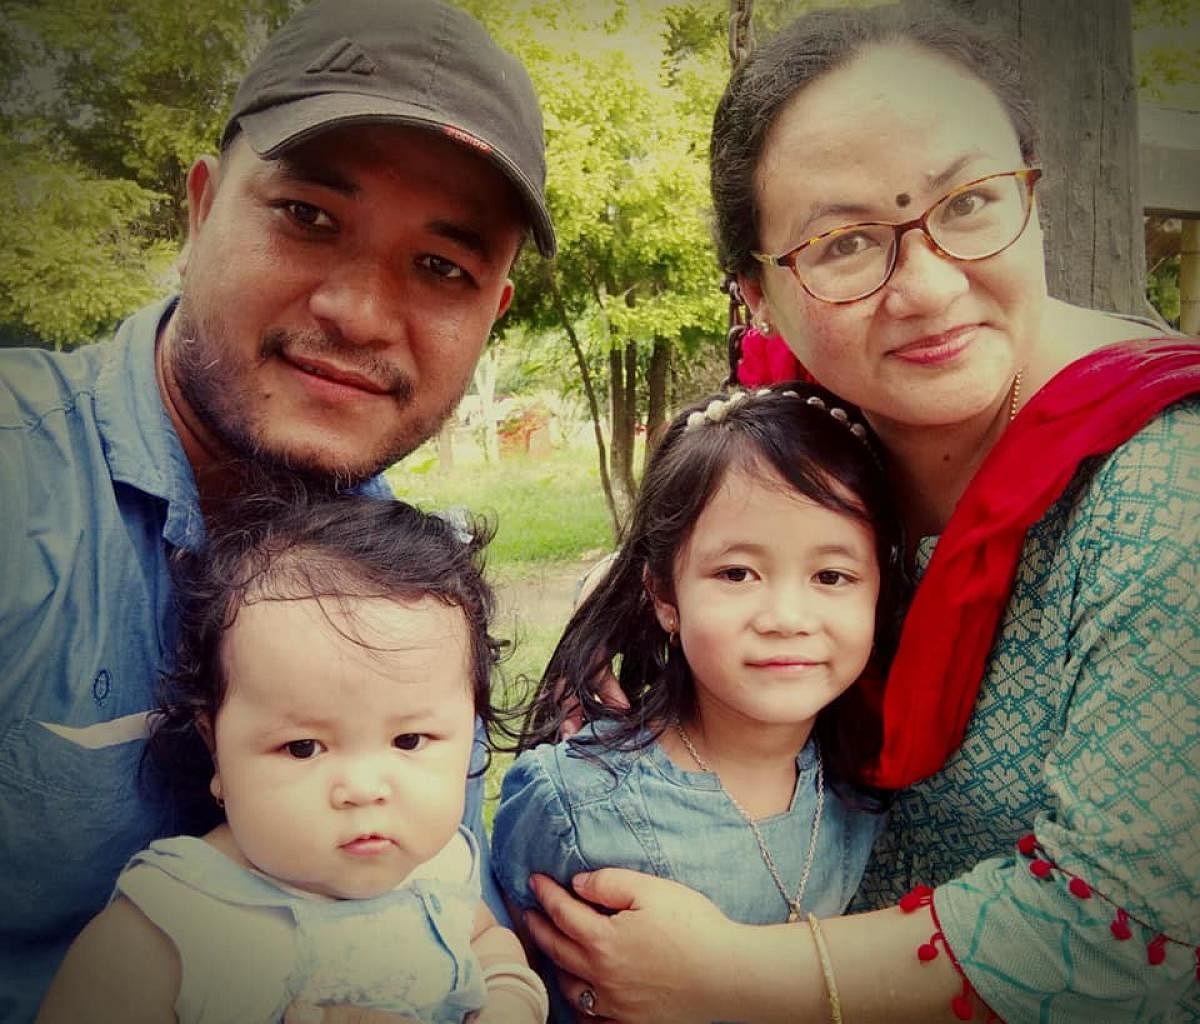 Ranjita has been fighting against the detention of her husband, who has been detained for 12 months under the National Security Act (NSA) for a Facebook post criticising the BJP-led Manipur government and Chief Minister N Biren Singh.